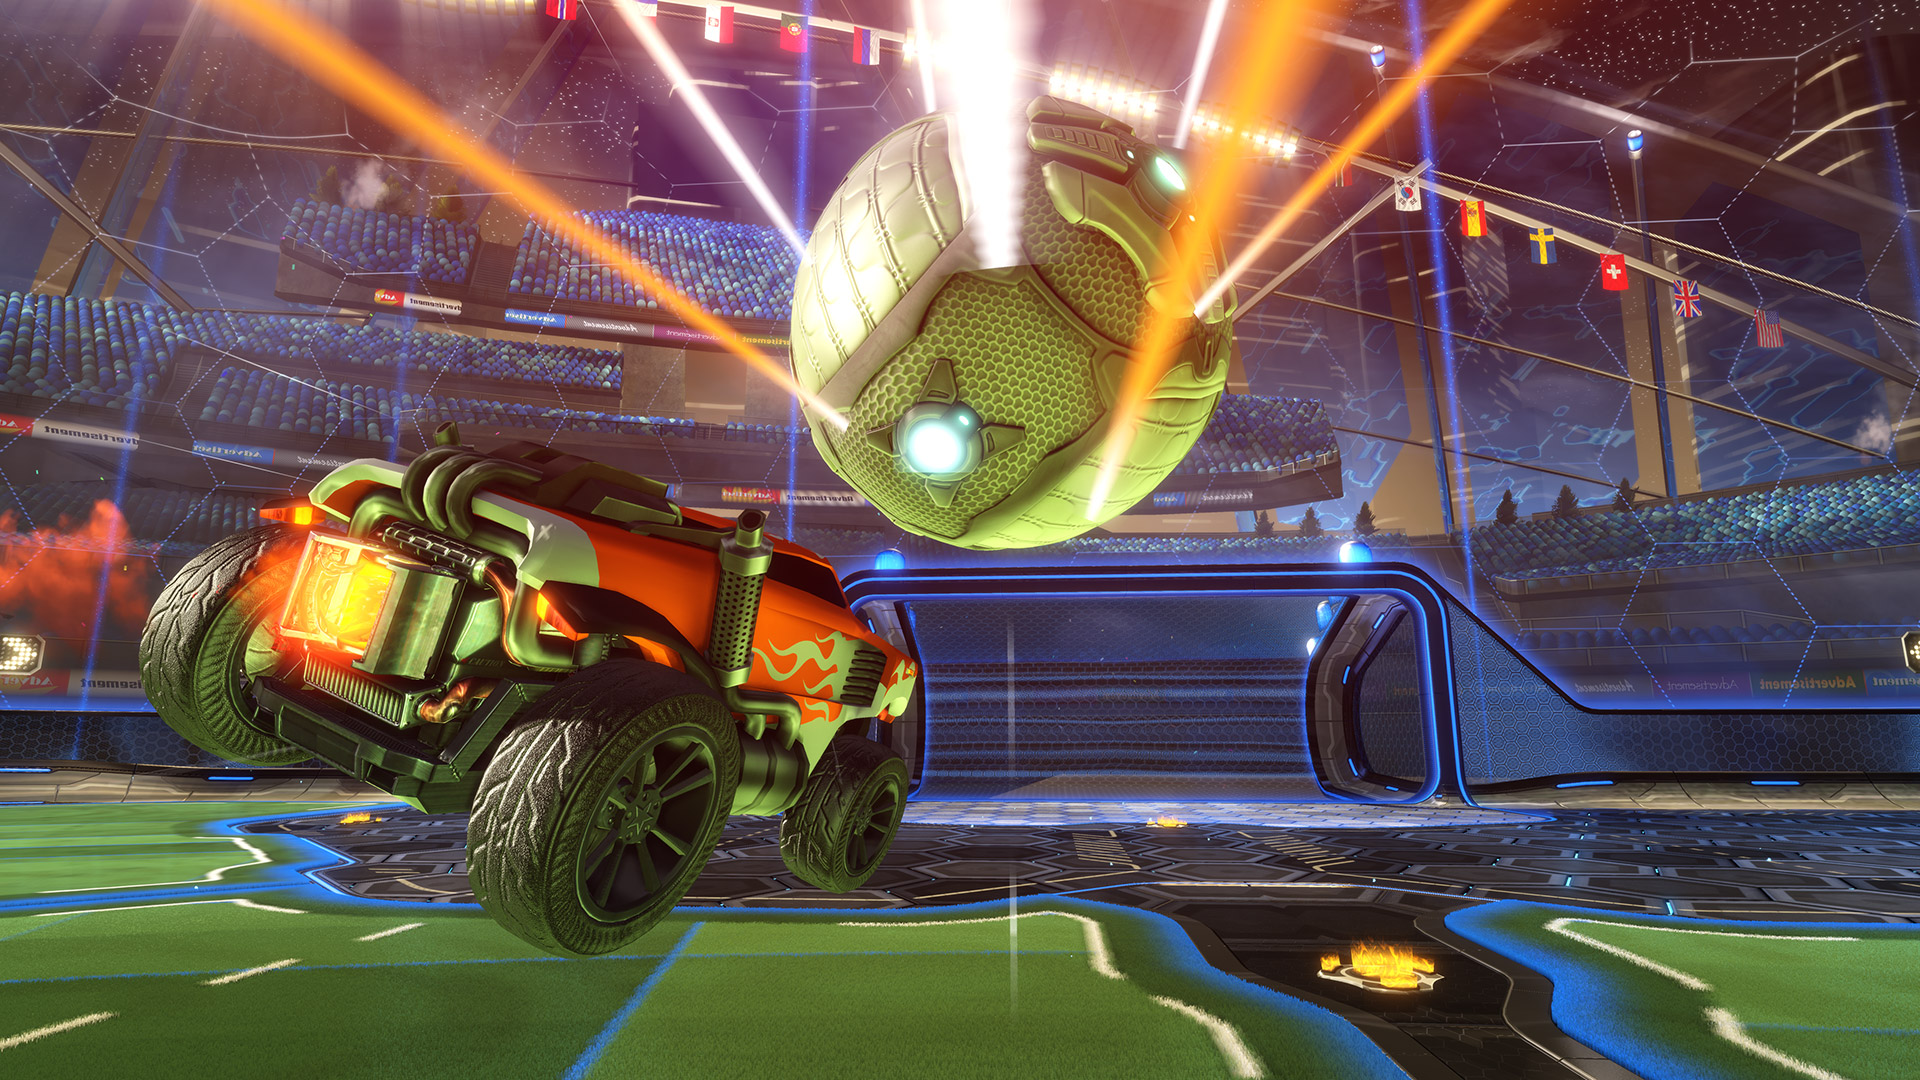 Rocket League leaps into Twitchs most-watched games